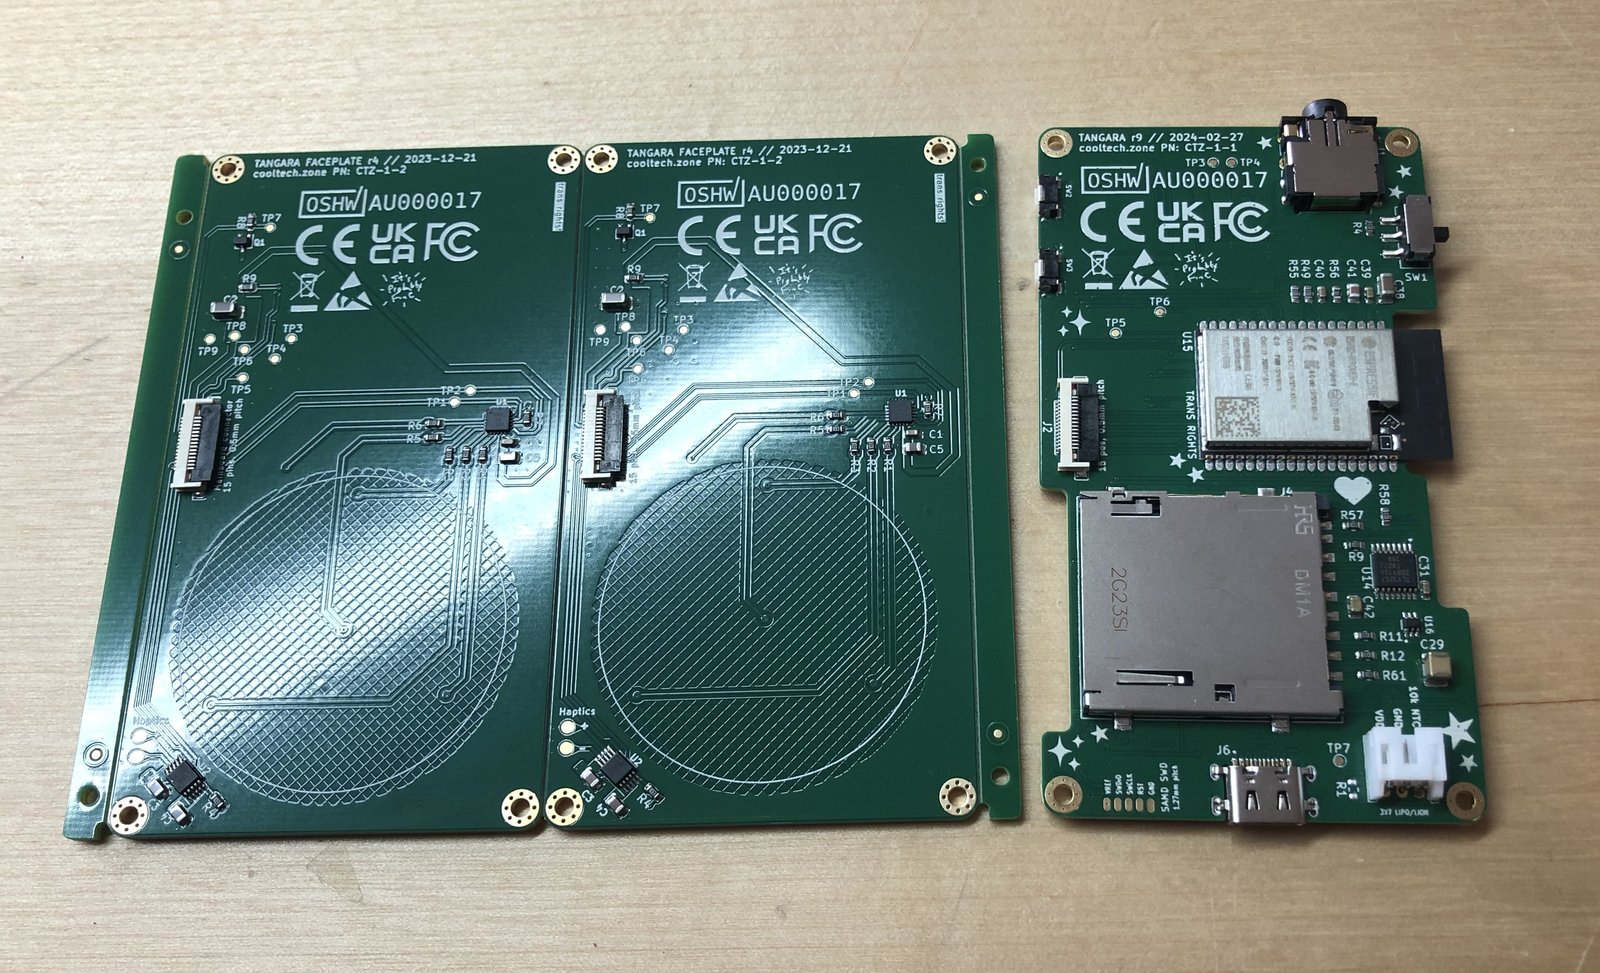 Assembled pre-production faceplate and mainboard PCBs